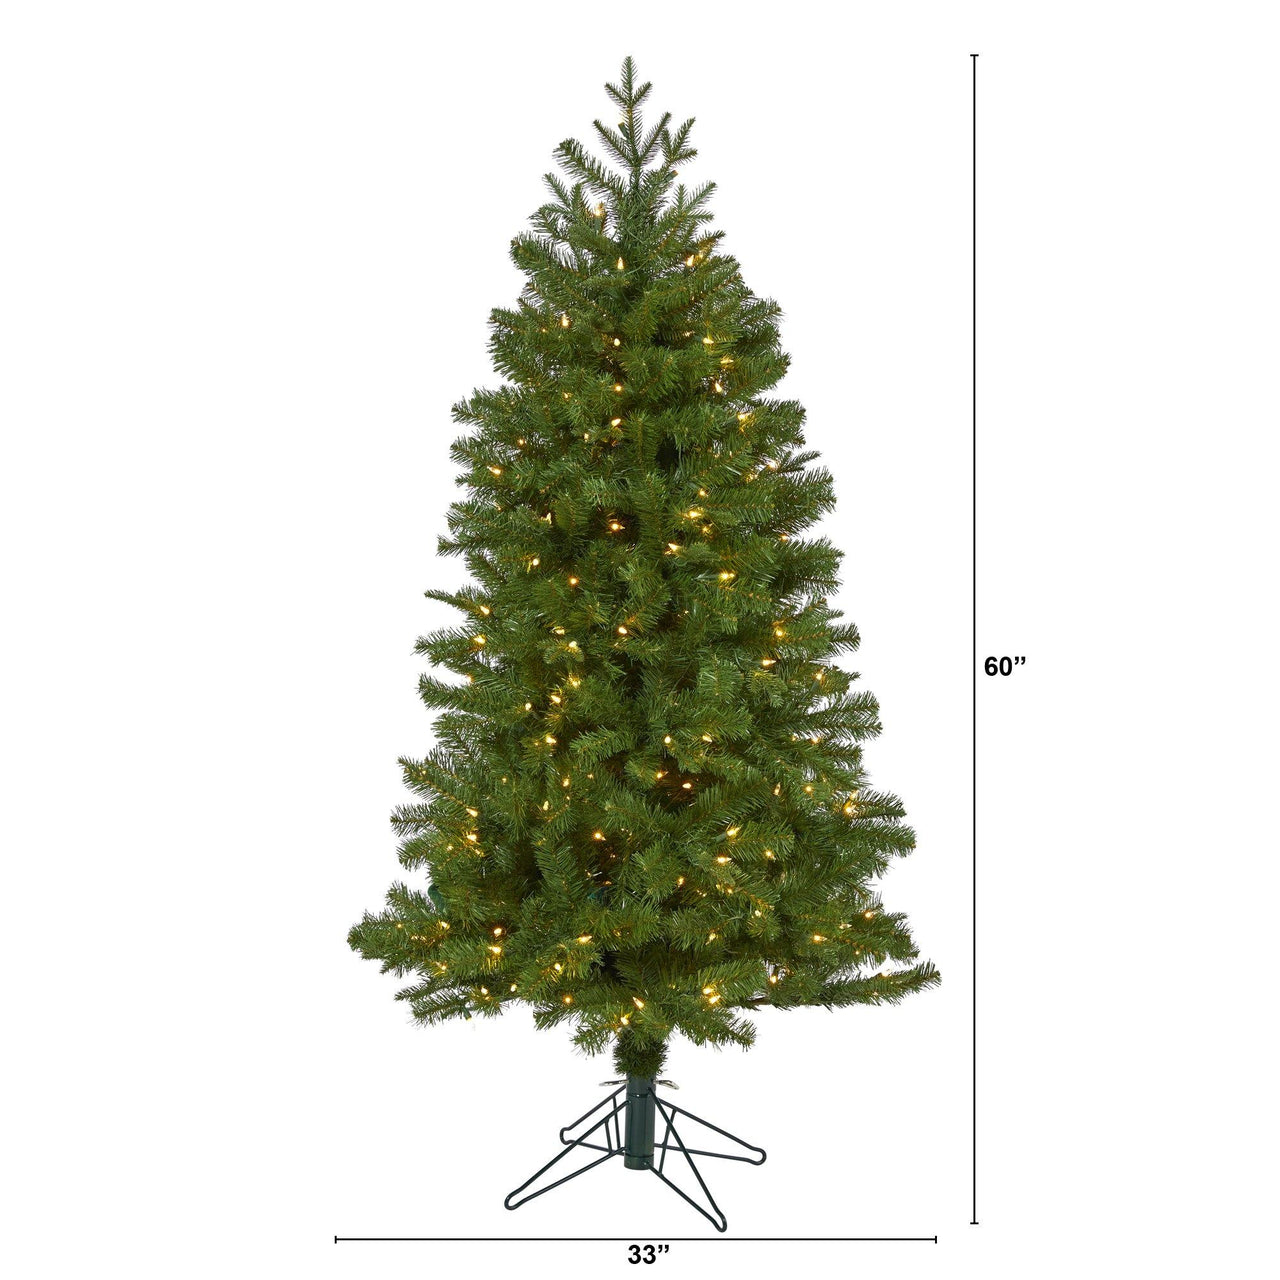 5' Vancouver Spruce Artificial Christmas Tree with 200 Warm White Lights and 461 Bendable Branches - The Fox Decor